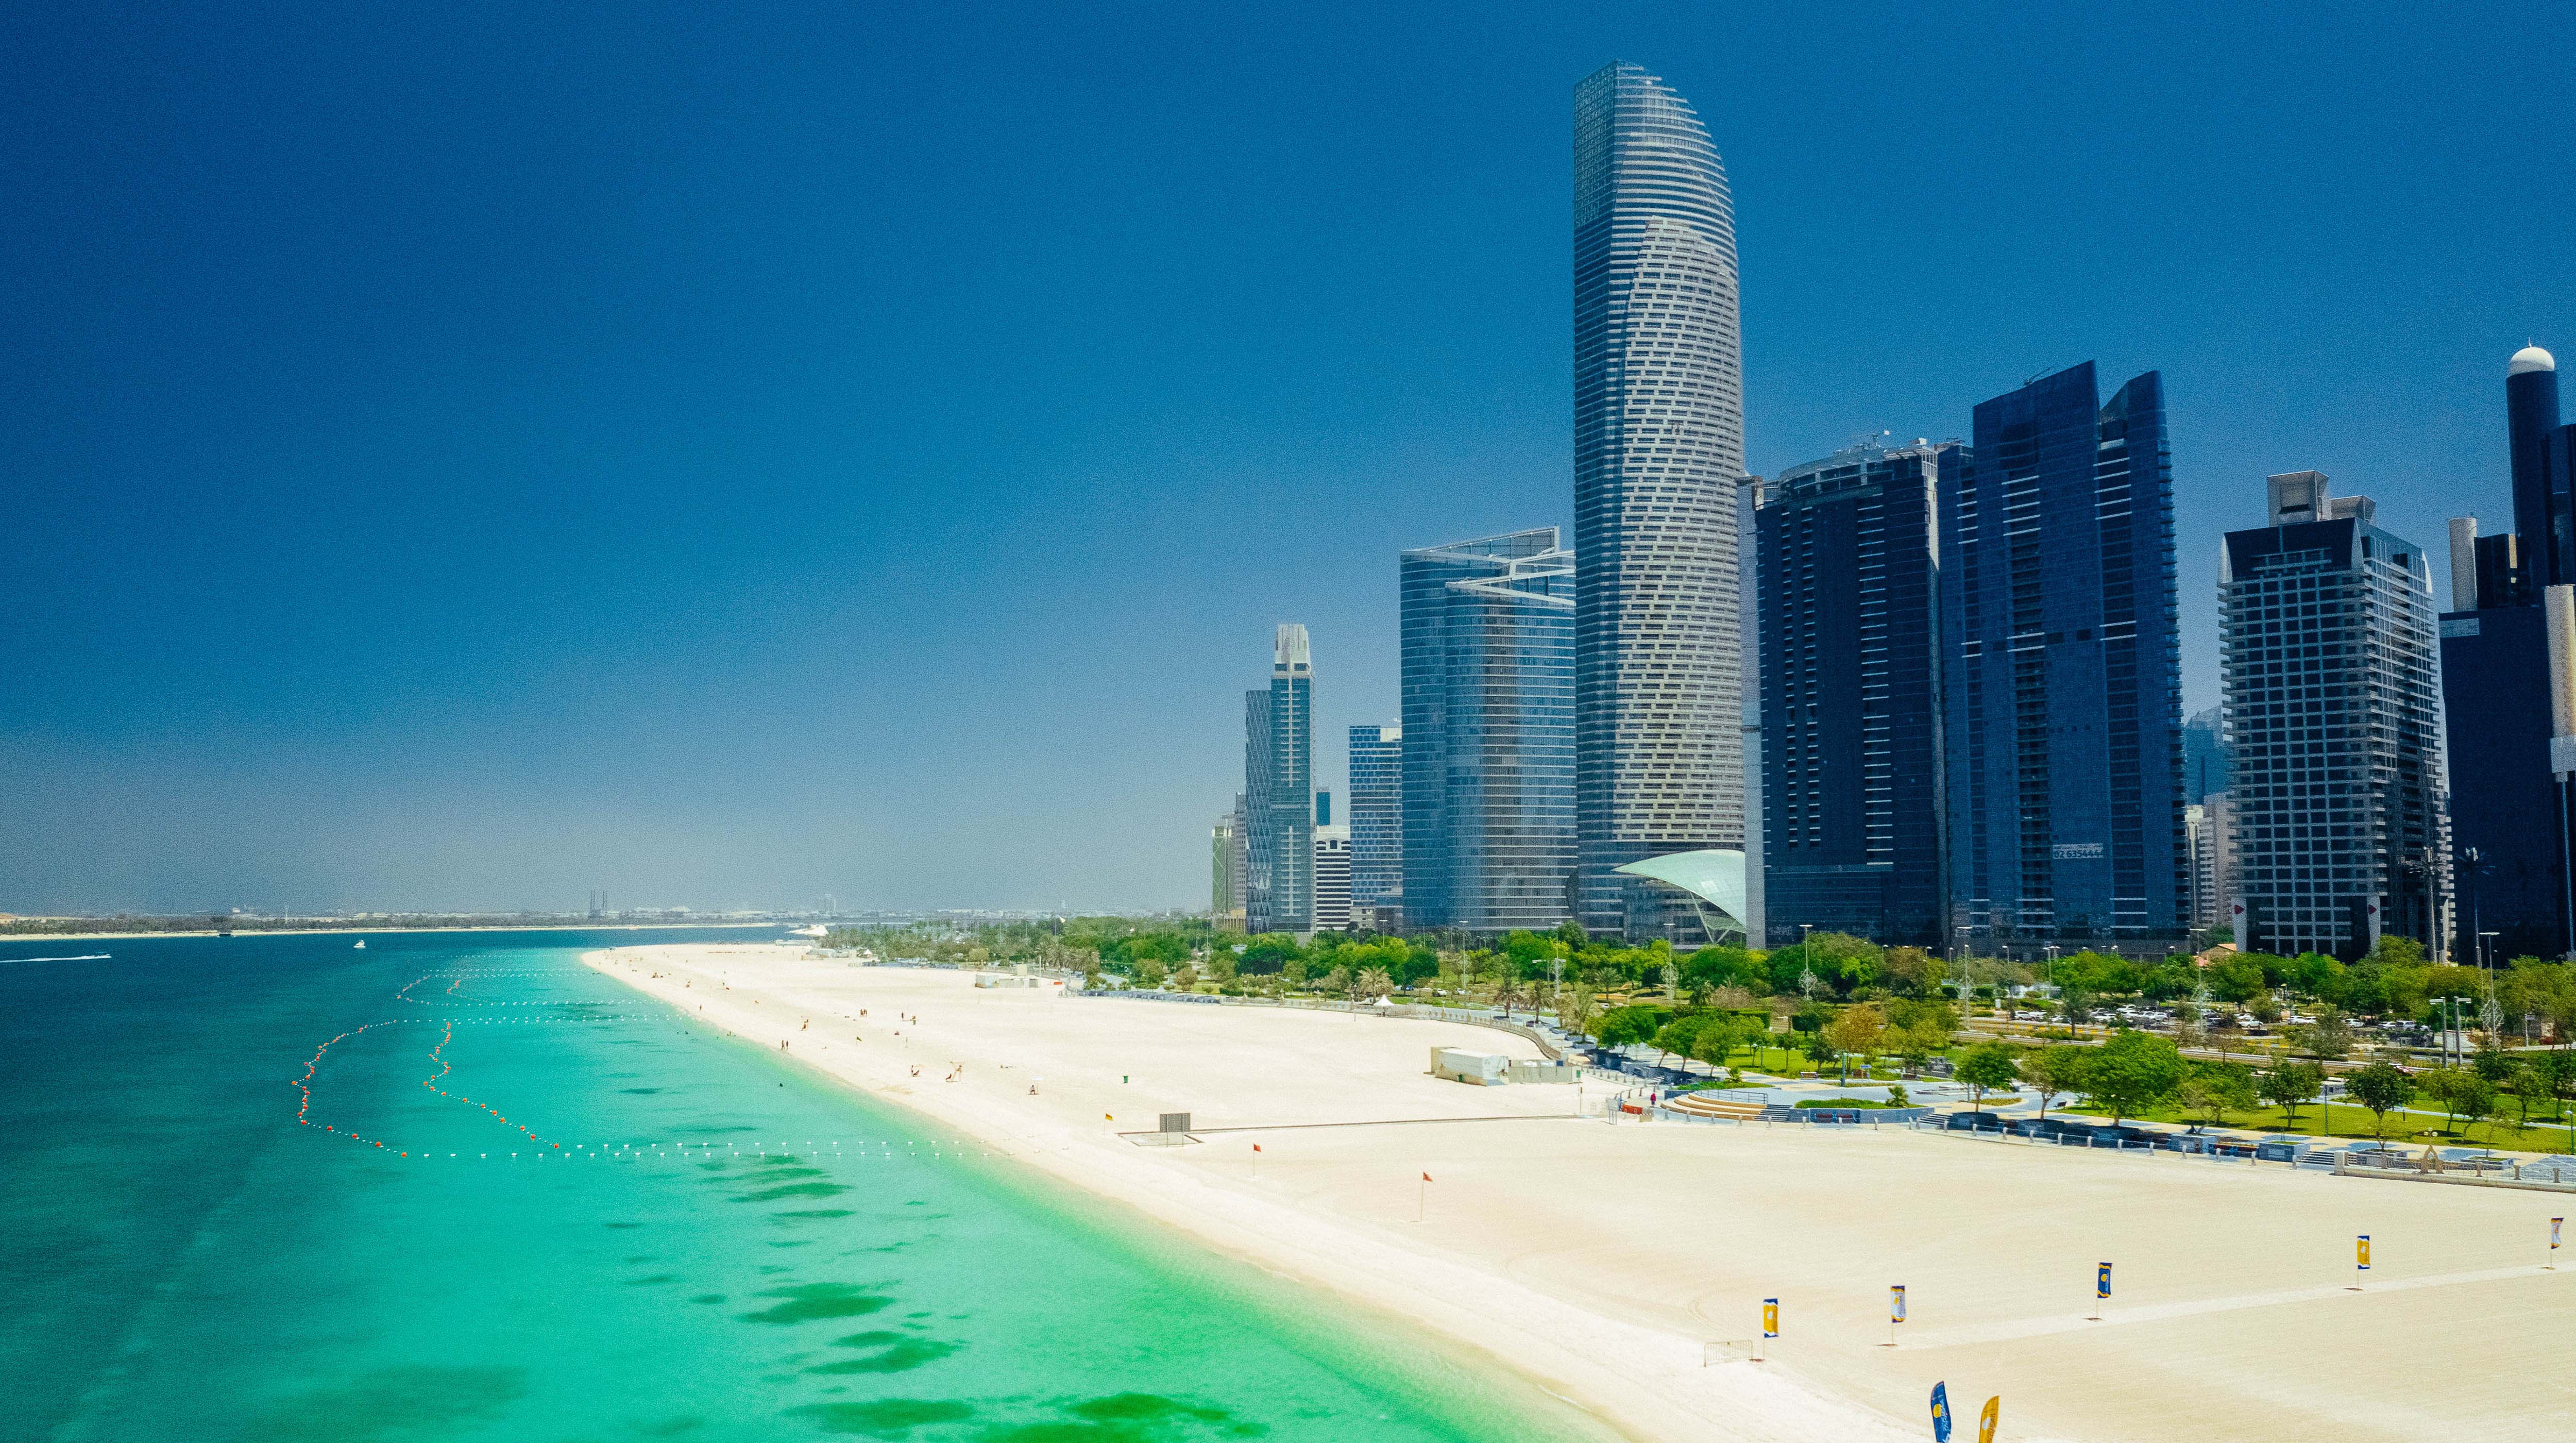 View of Abu Dhabi high rise buildings from the beach